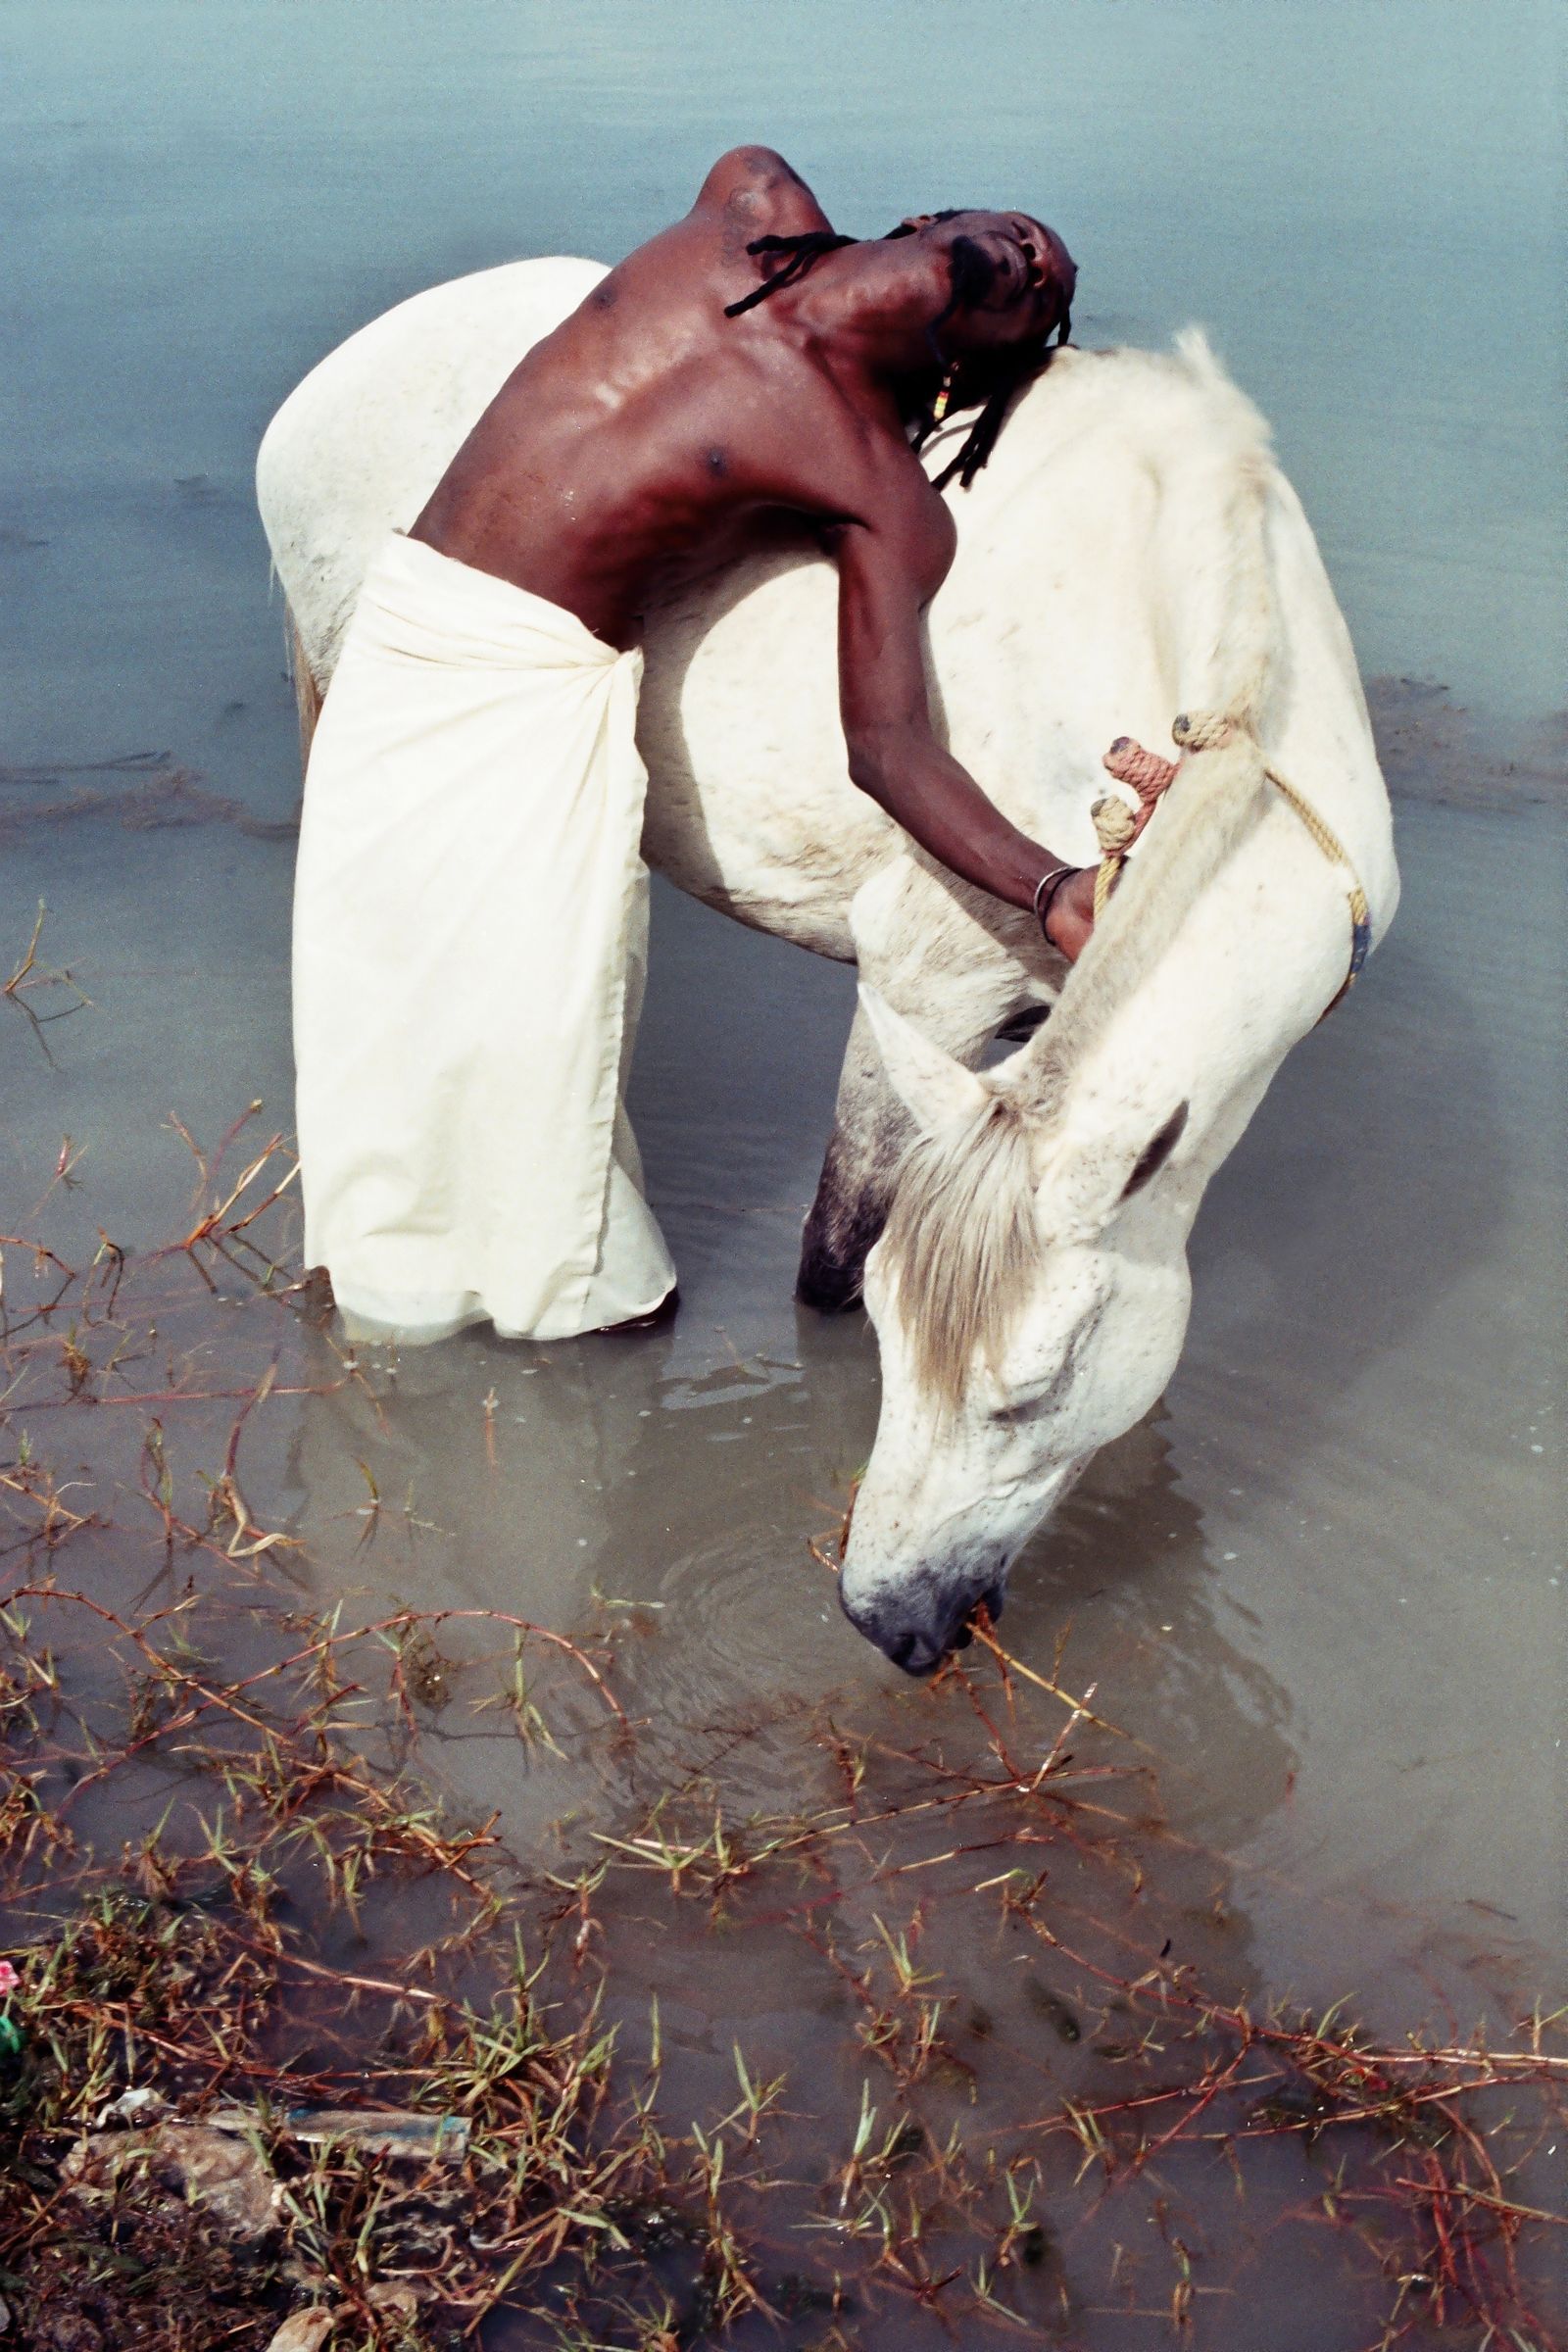 © Denisse Ariana Pérez - Image from the "Men and Water" photography project